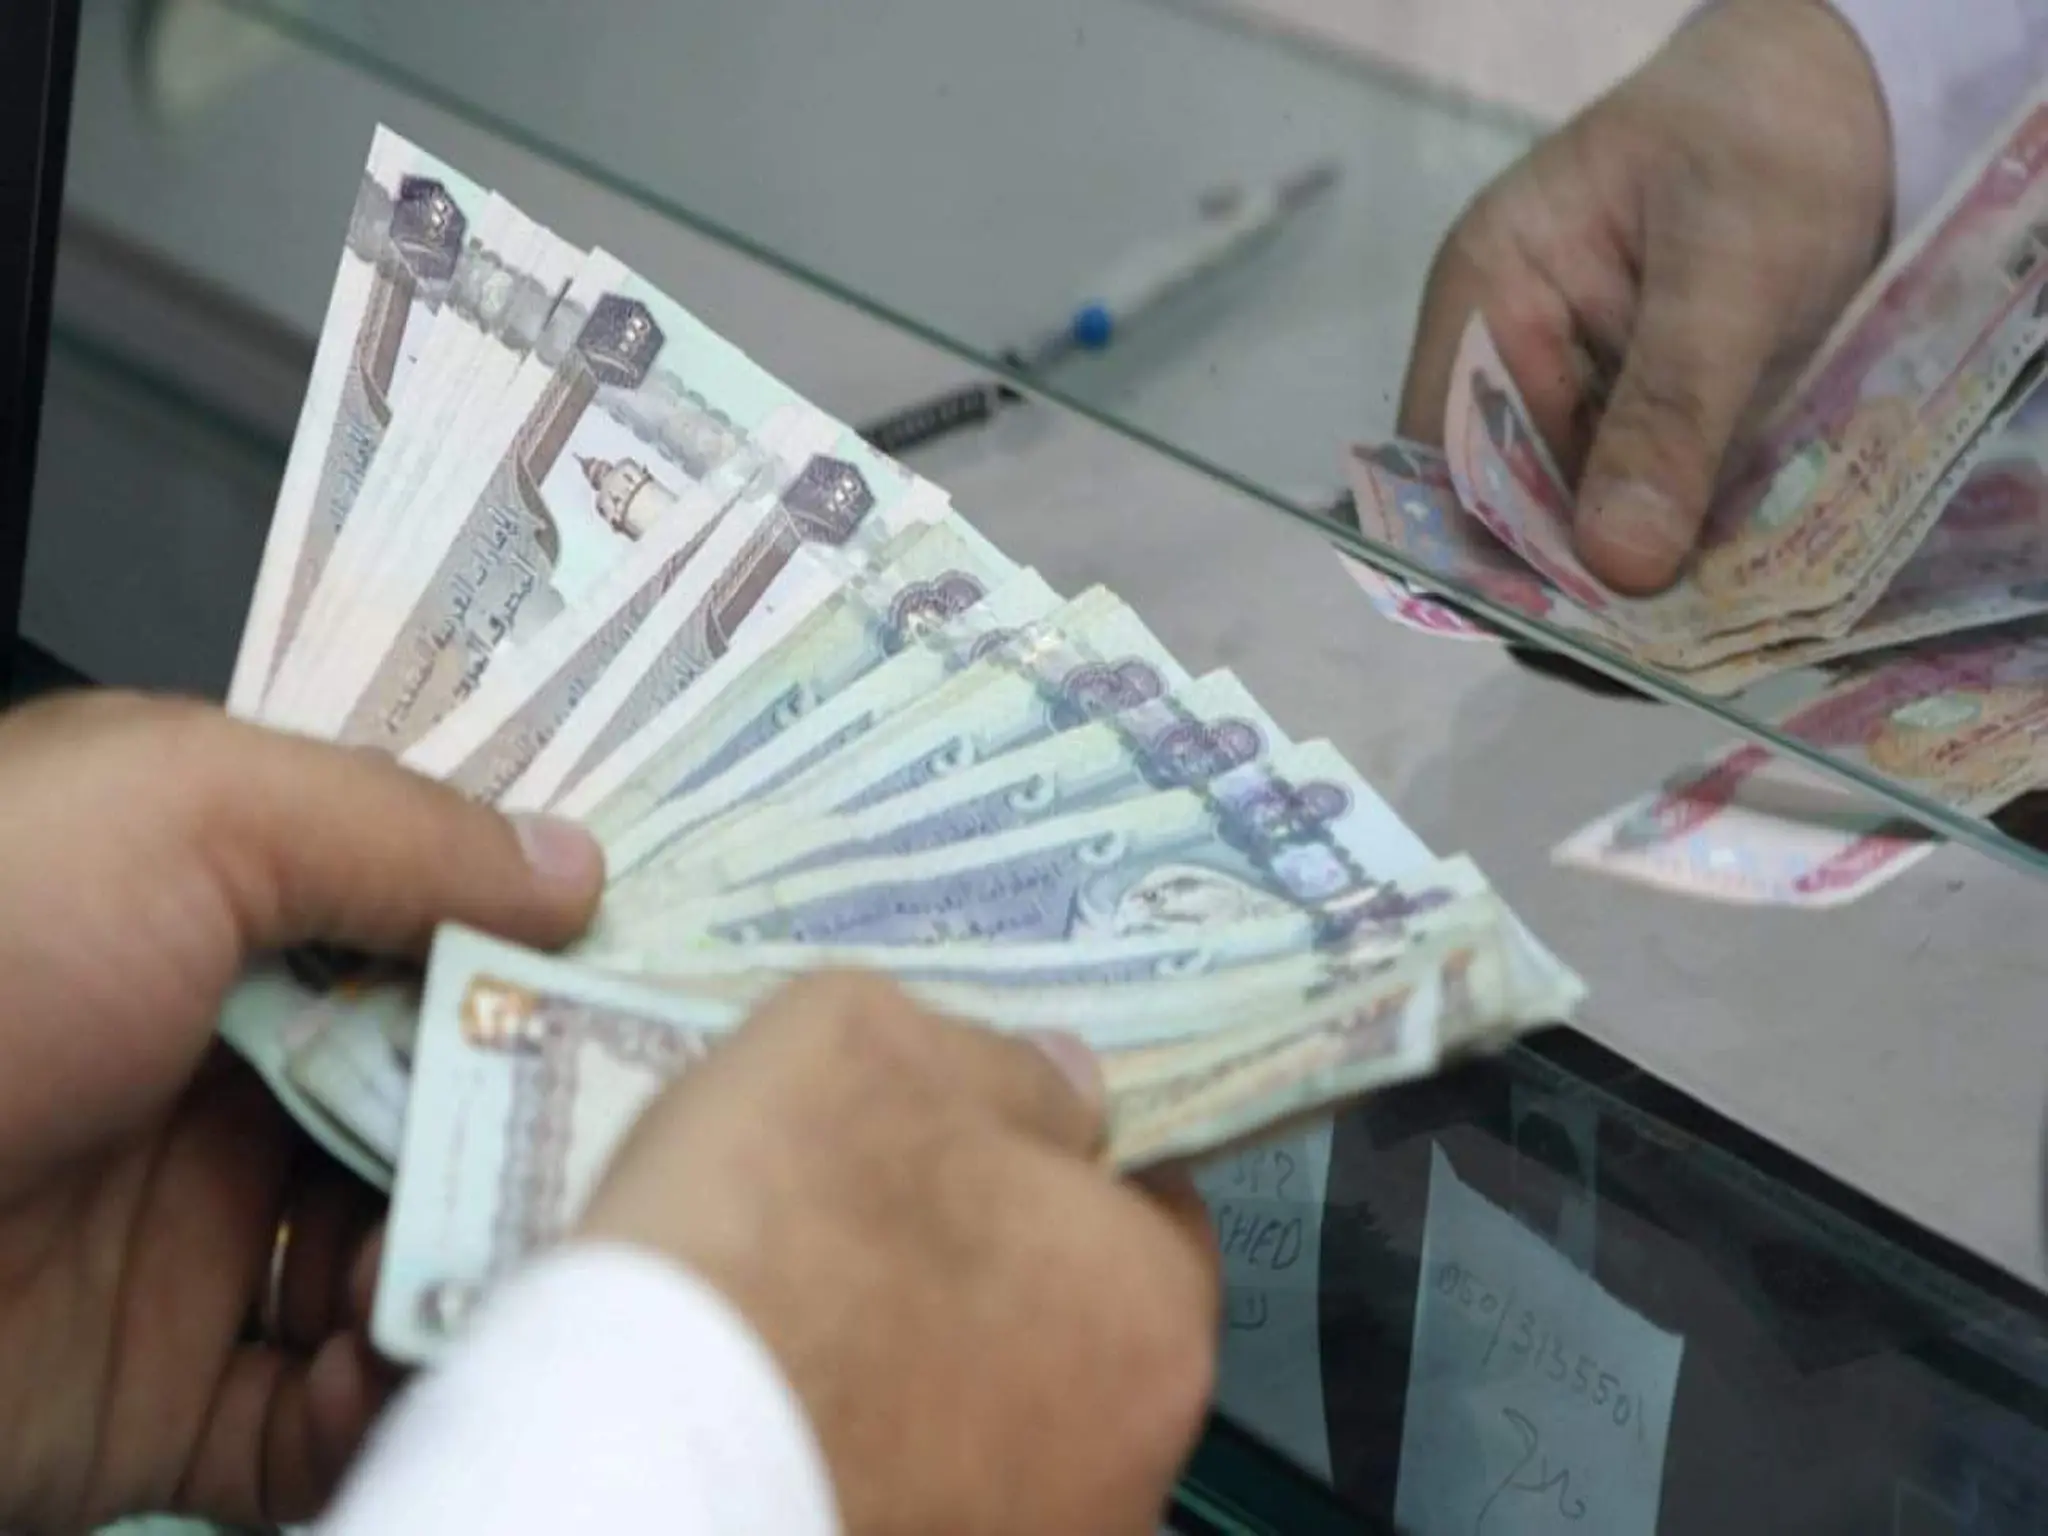 Urgent UAE: Banks retroactively deduct 159 dirhams as a fee for low “balance”